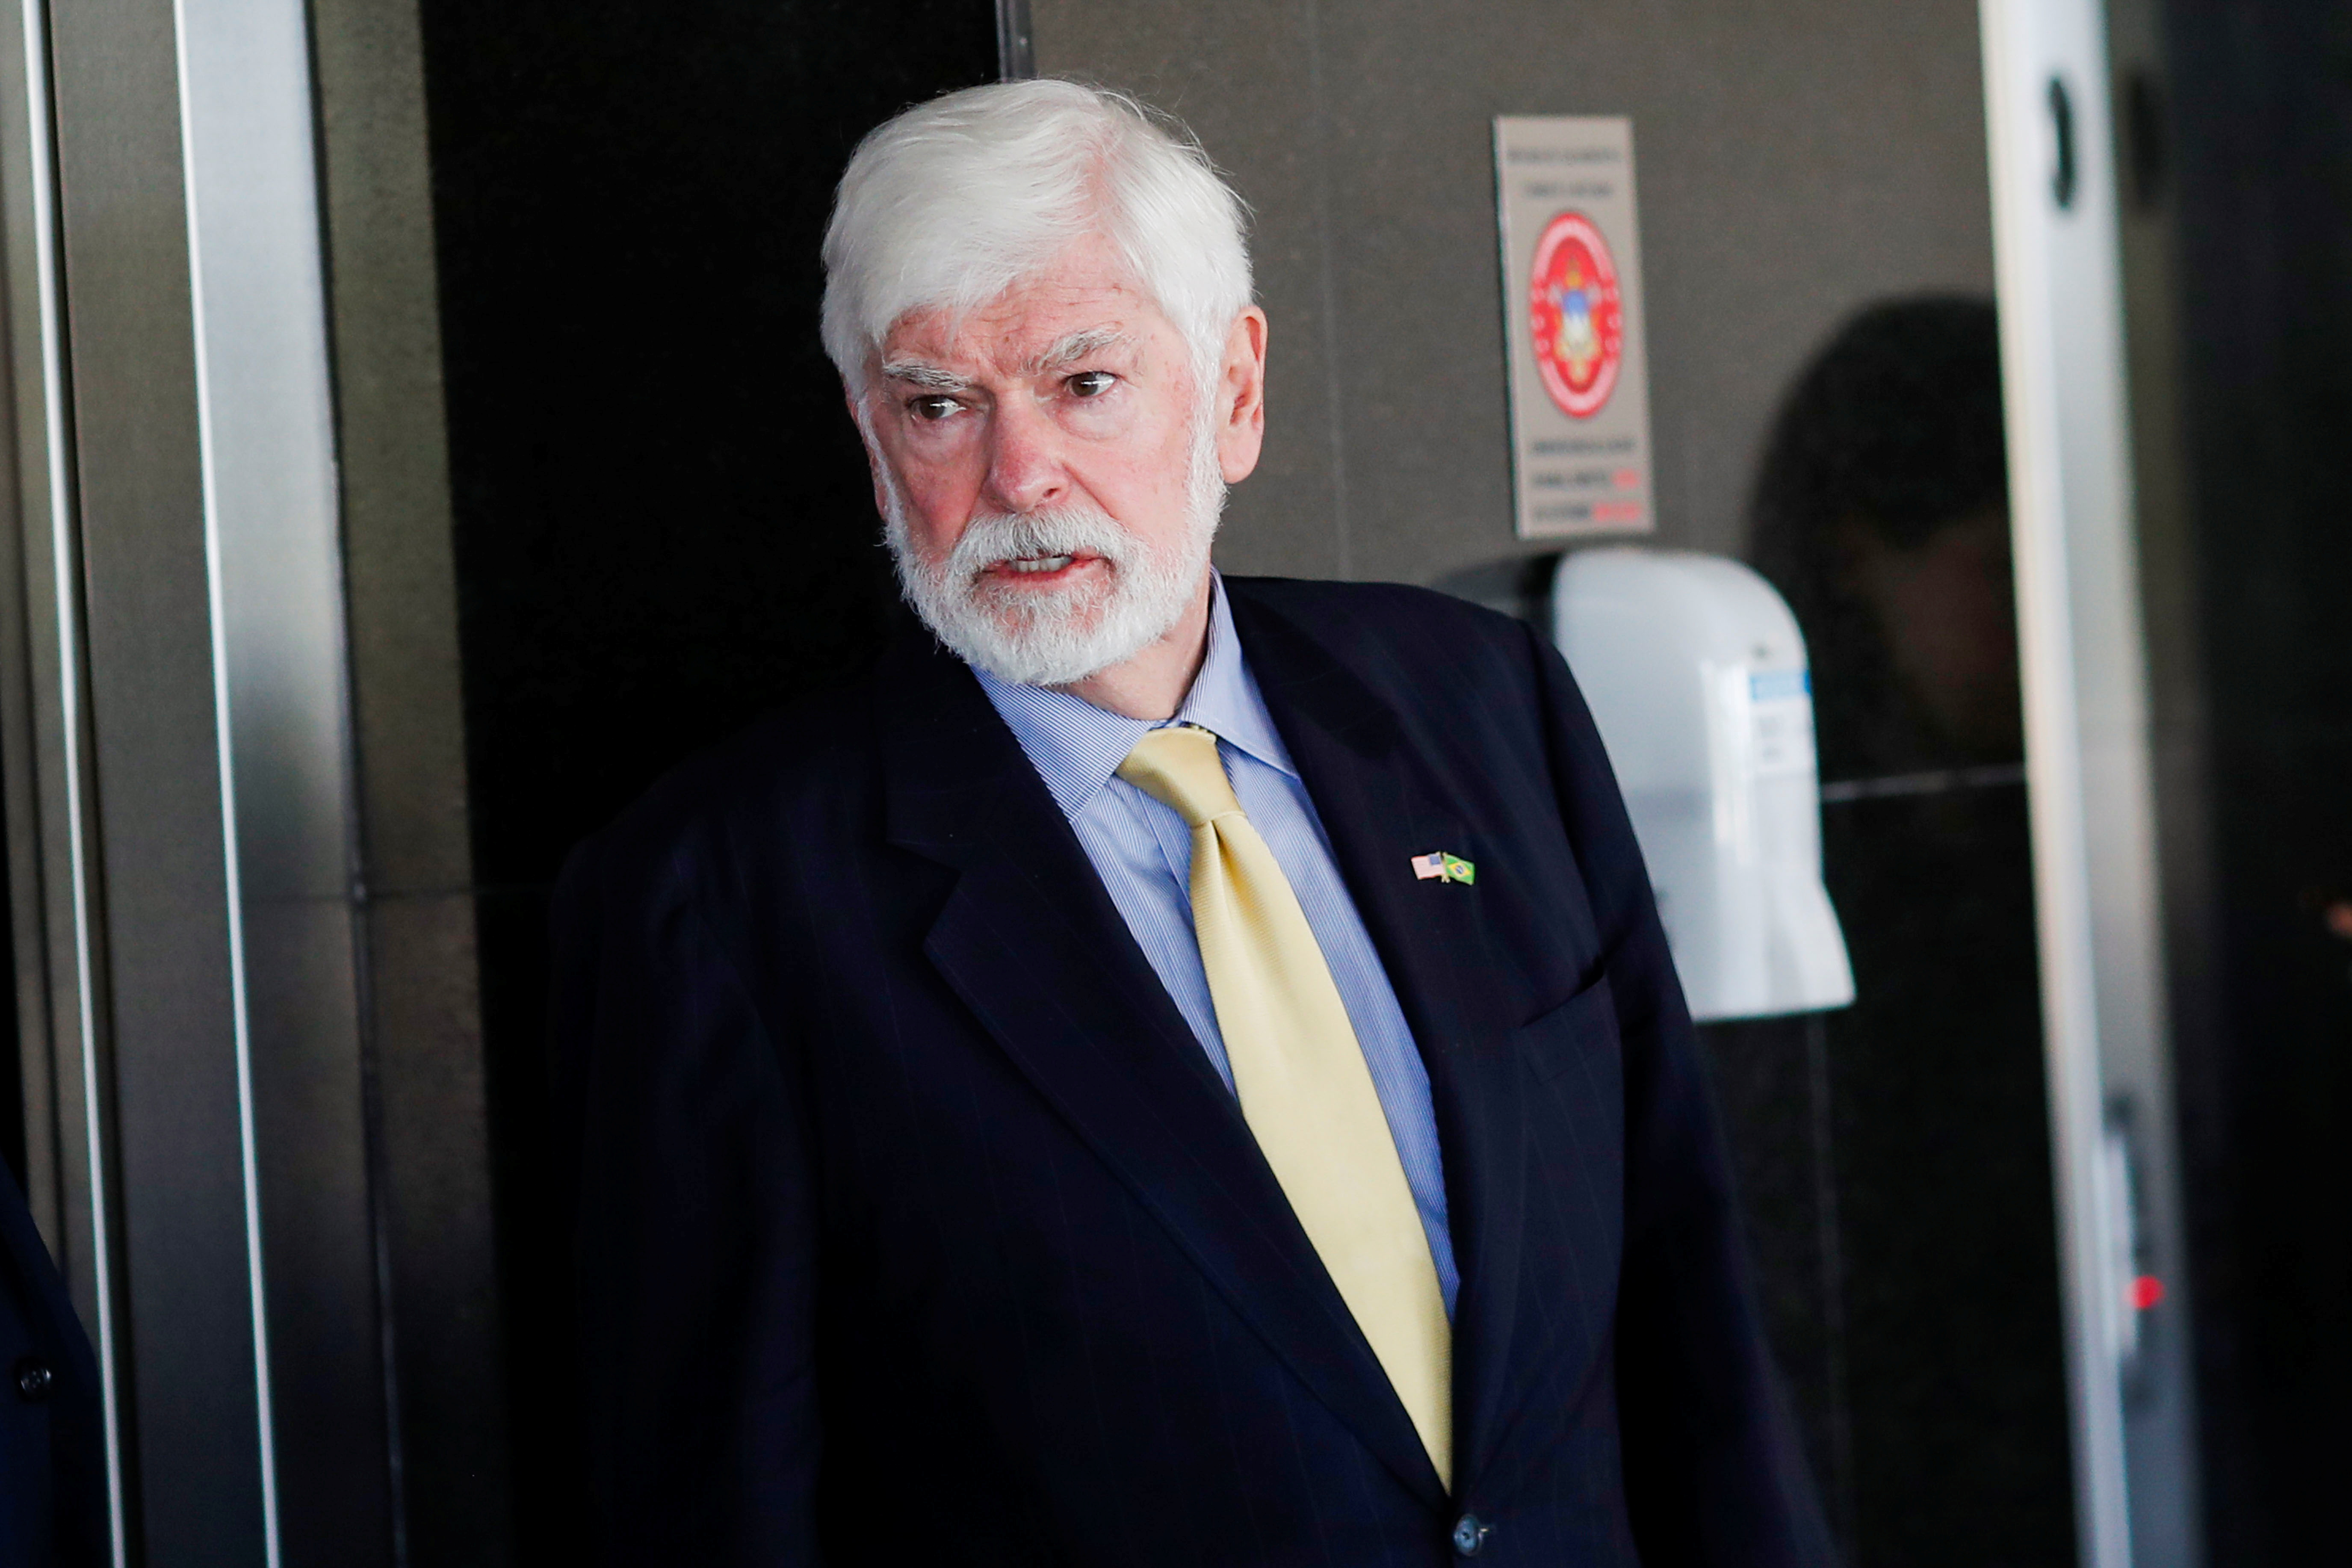 Special Advisor for the Summit of the Americas, Chris Dodd walks after meeting with Brazil's President Jair Bolsonaro (not pictured) at the Planato Palace, in Brasilia